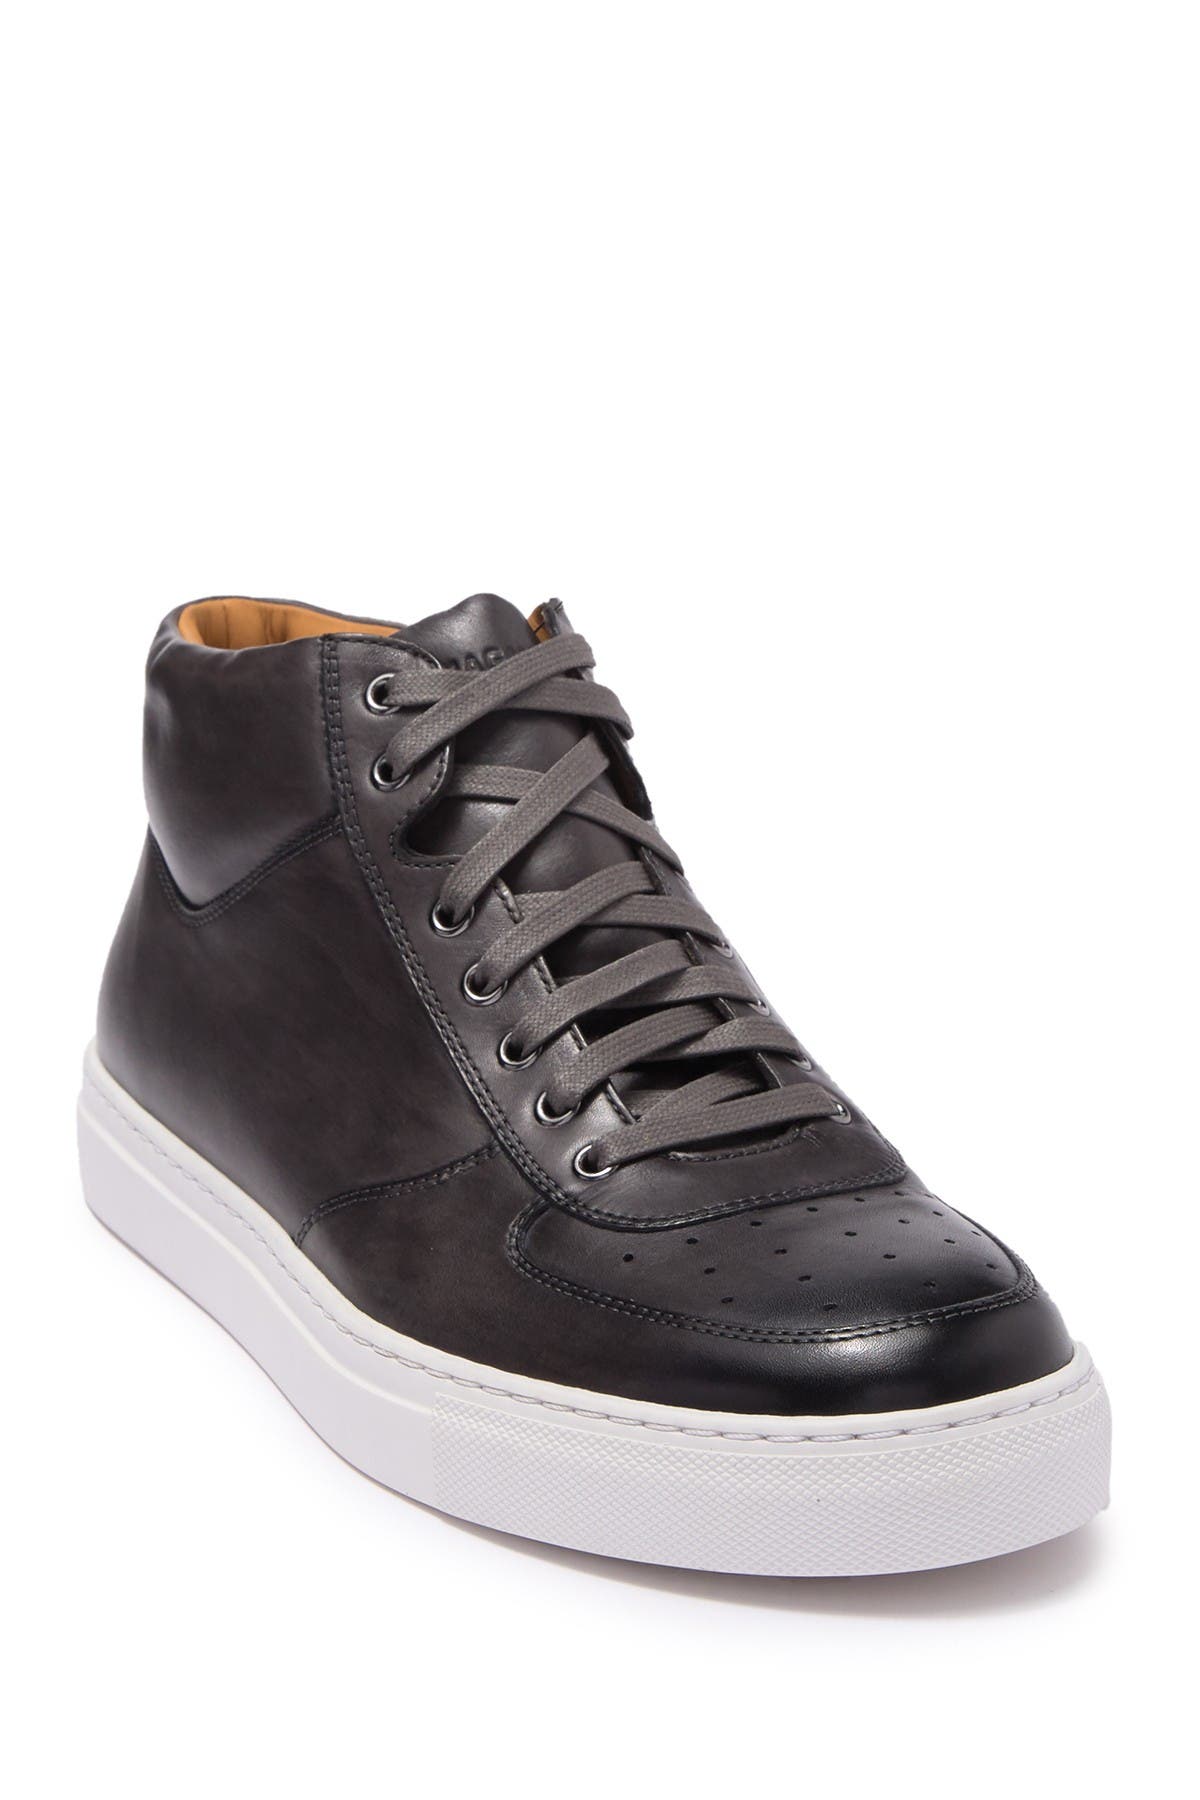 magnanni sneakers